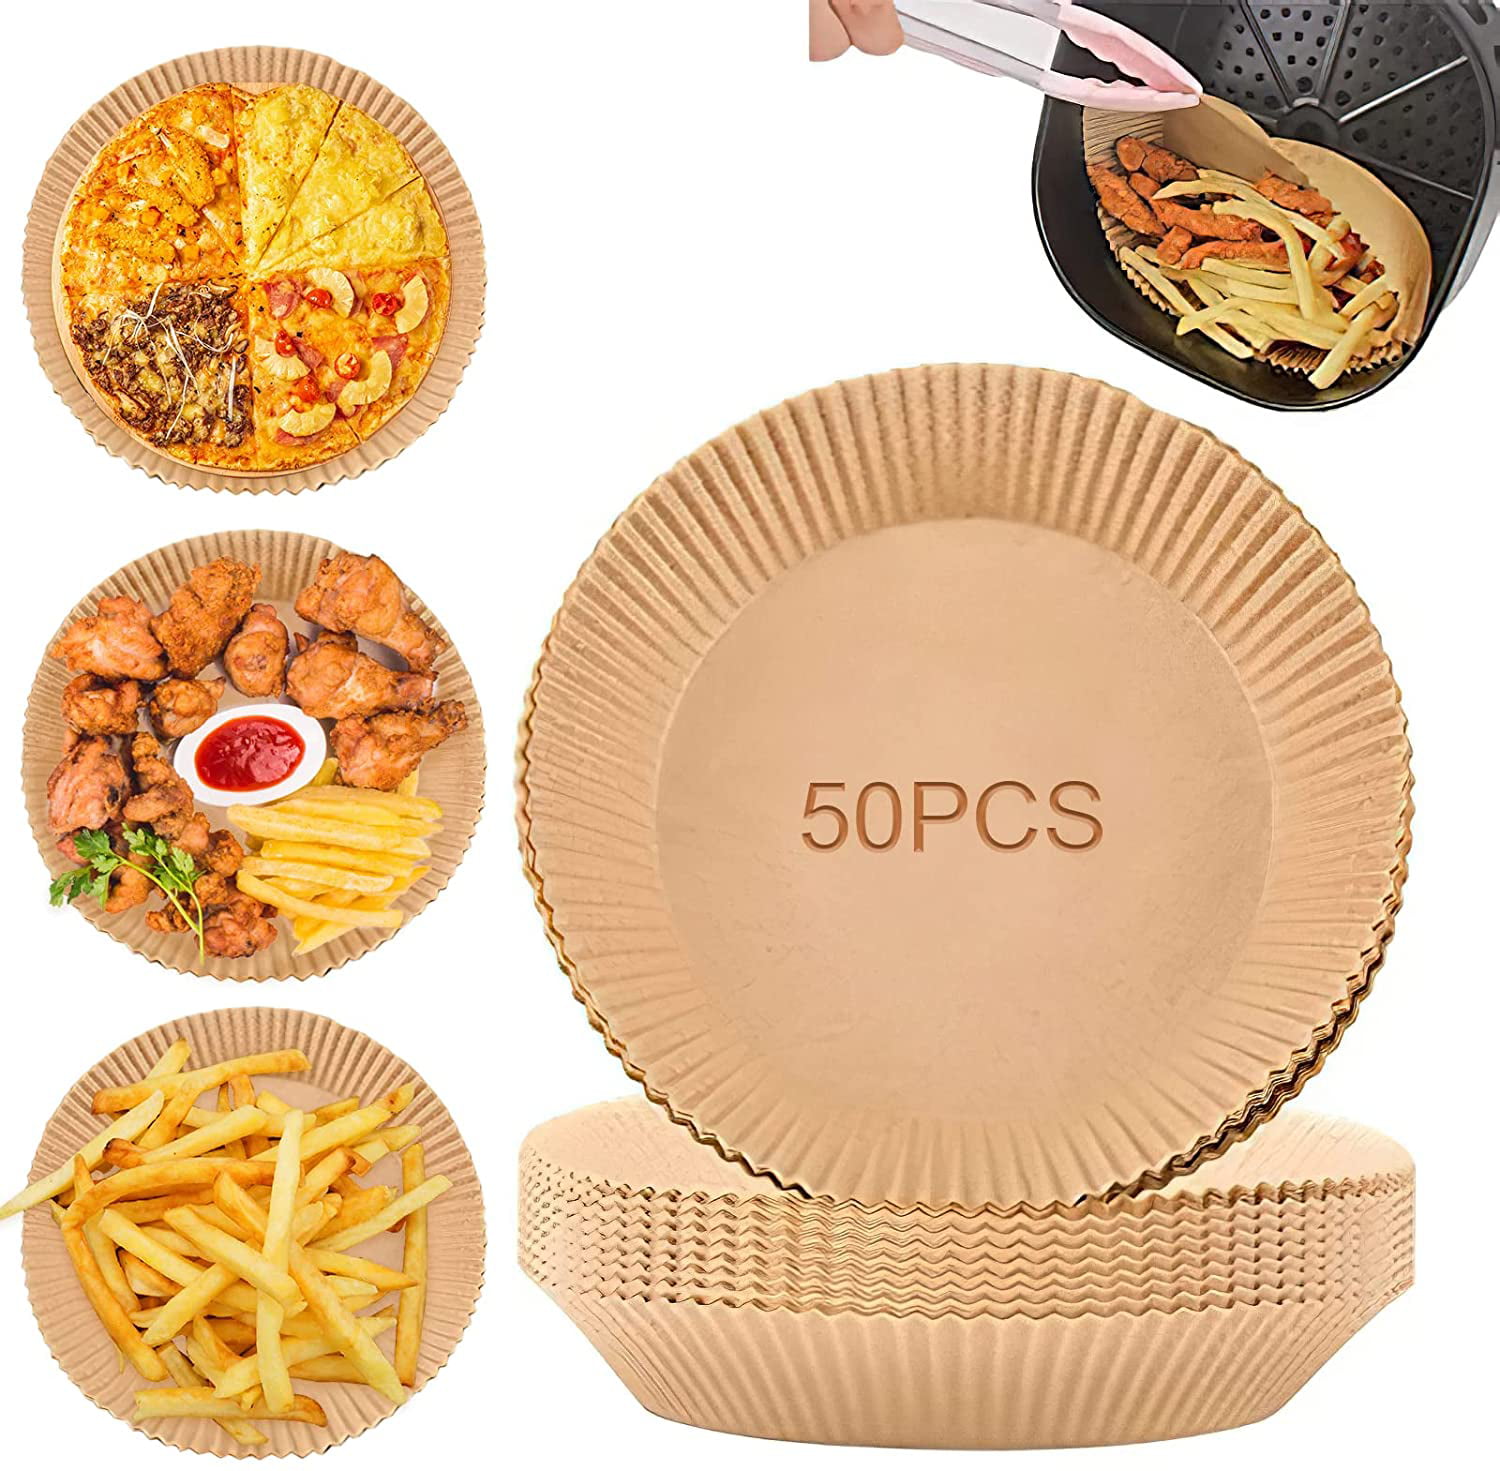 50 pcs Food Basket Liners Disposable Water-proof Baking Paper for BBQ Fast Food 